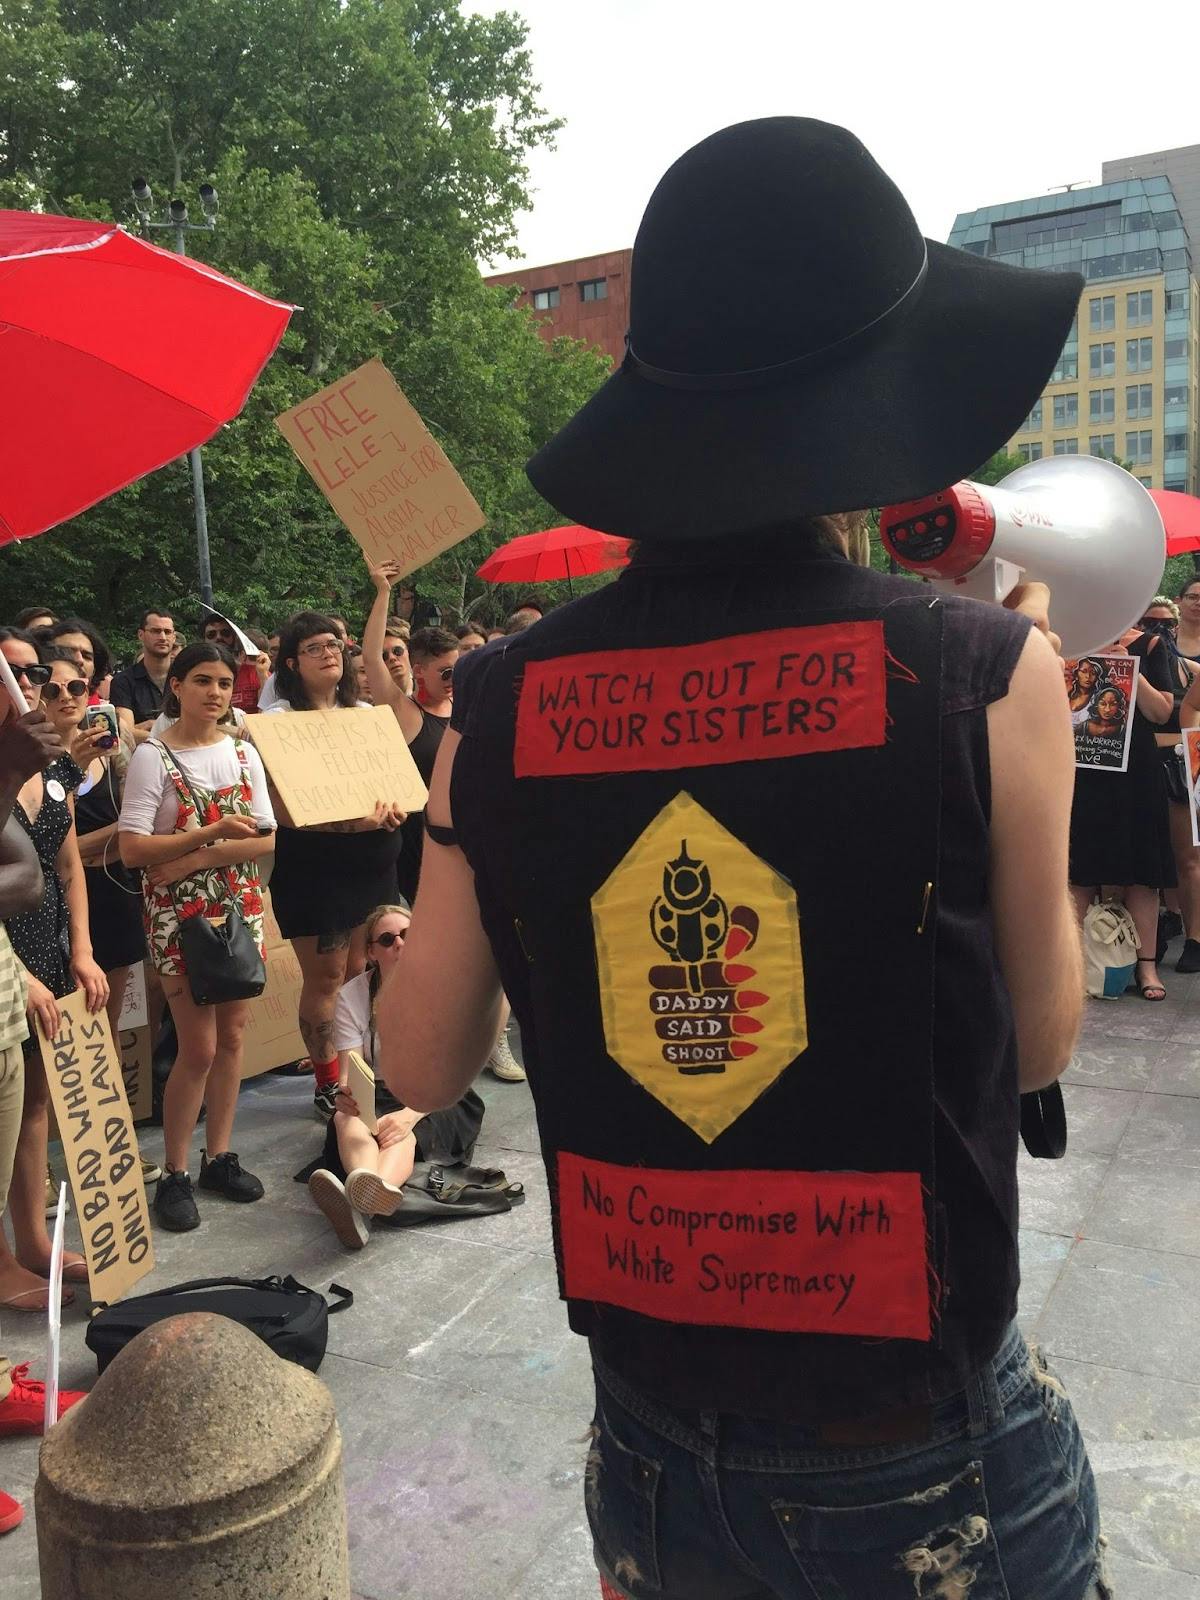 A person stands with their back to a crowd at a protest. They are holding a megaphone and wearing a black vest. The vest says, "Watch out for your sisters. No compromise with white supremacy."